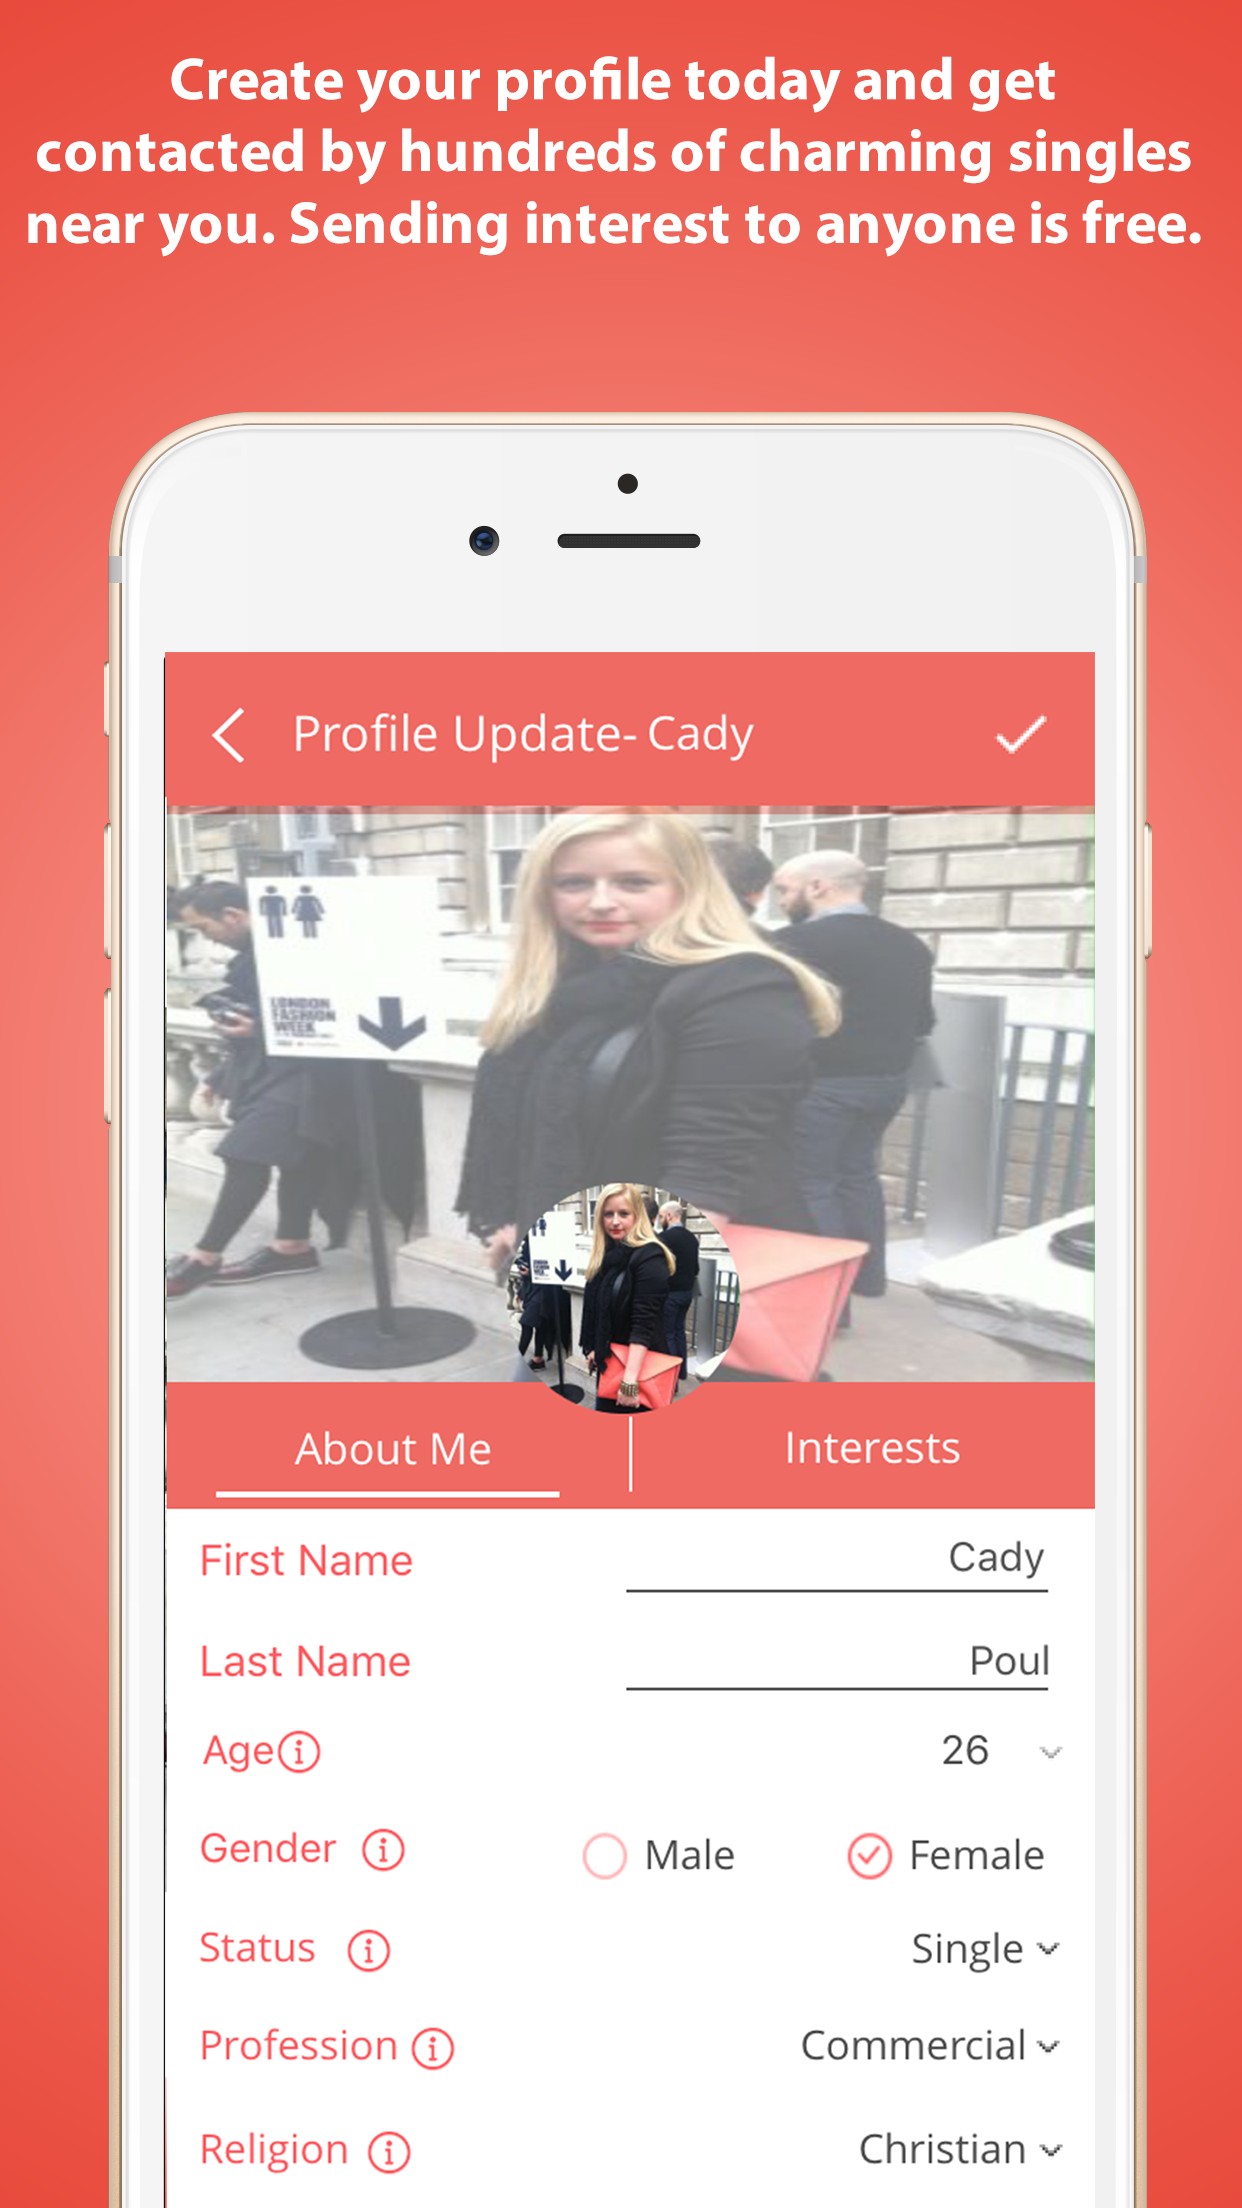 Findsoulmateapp - Finding a Soulmate